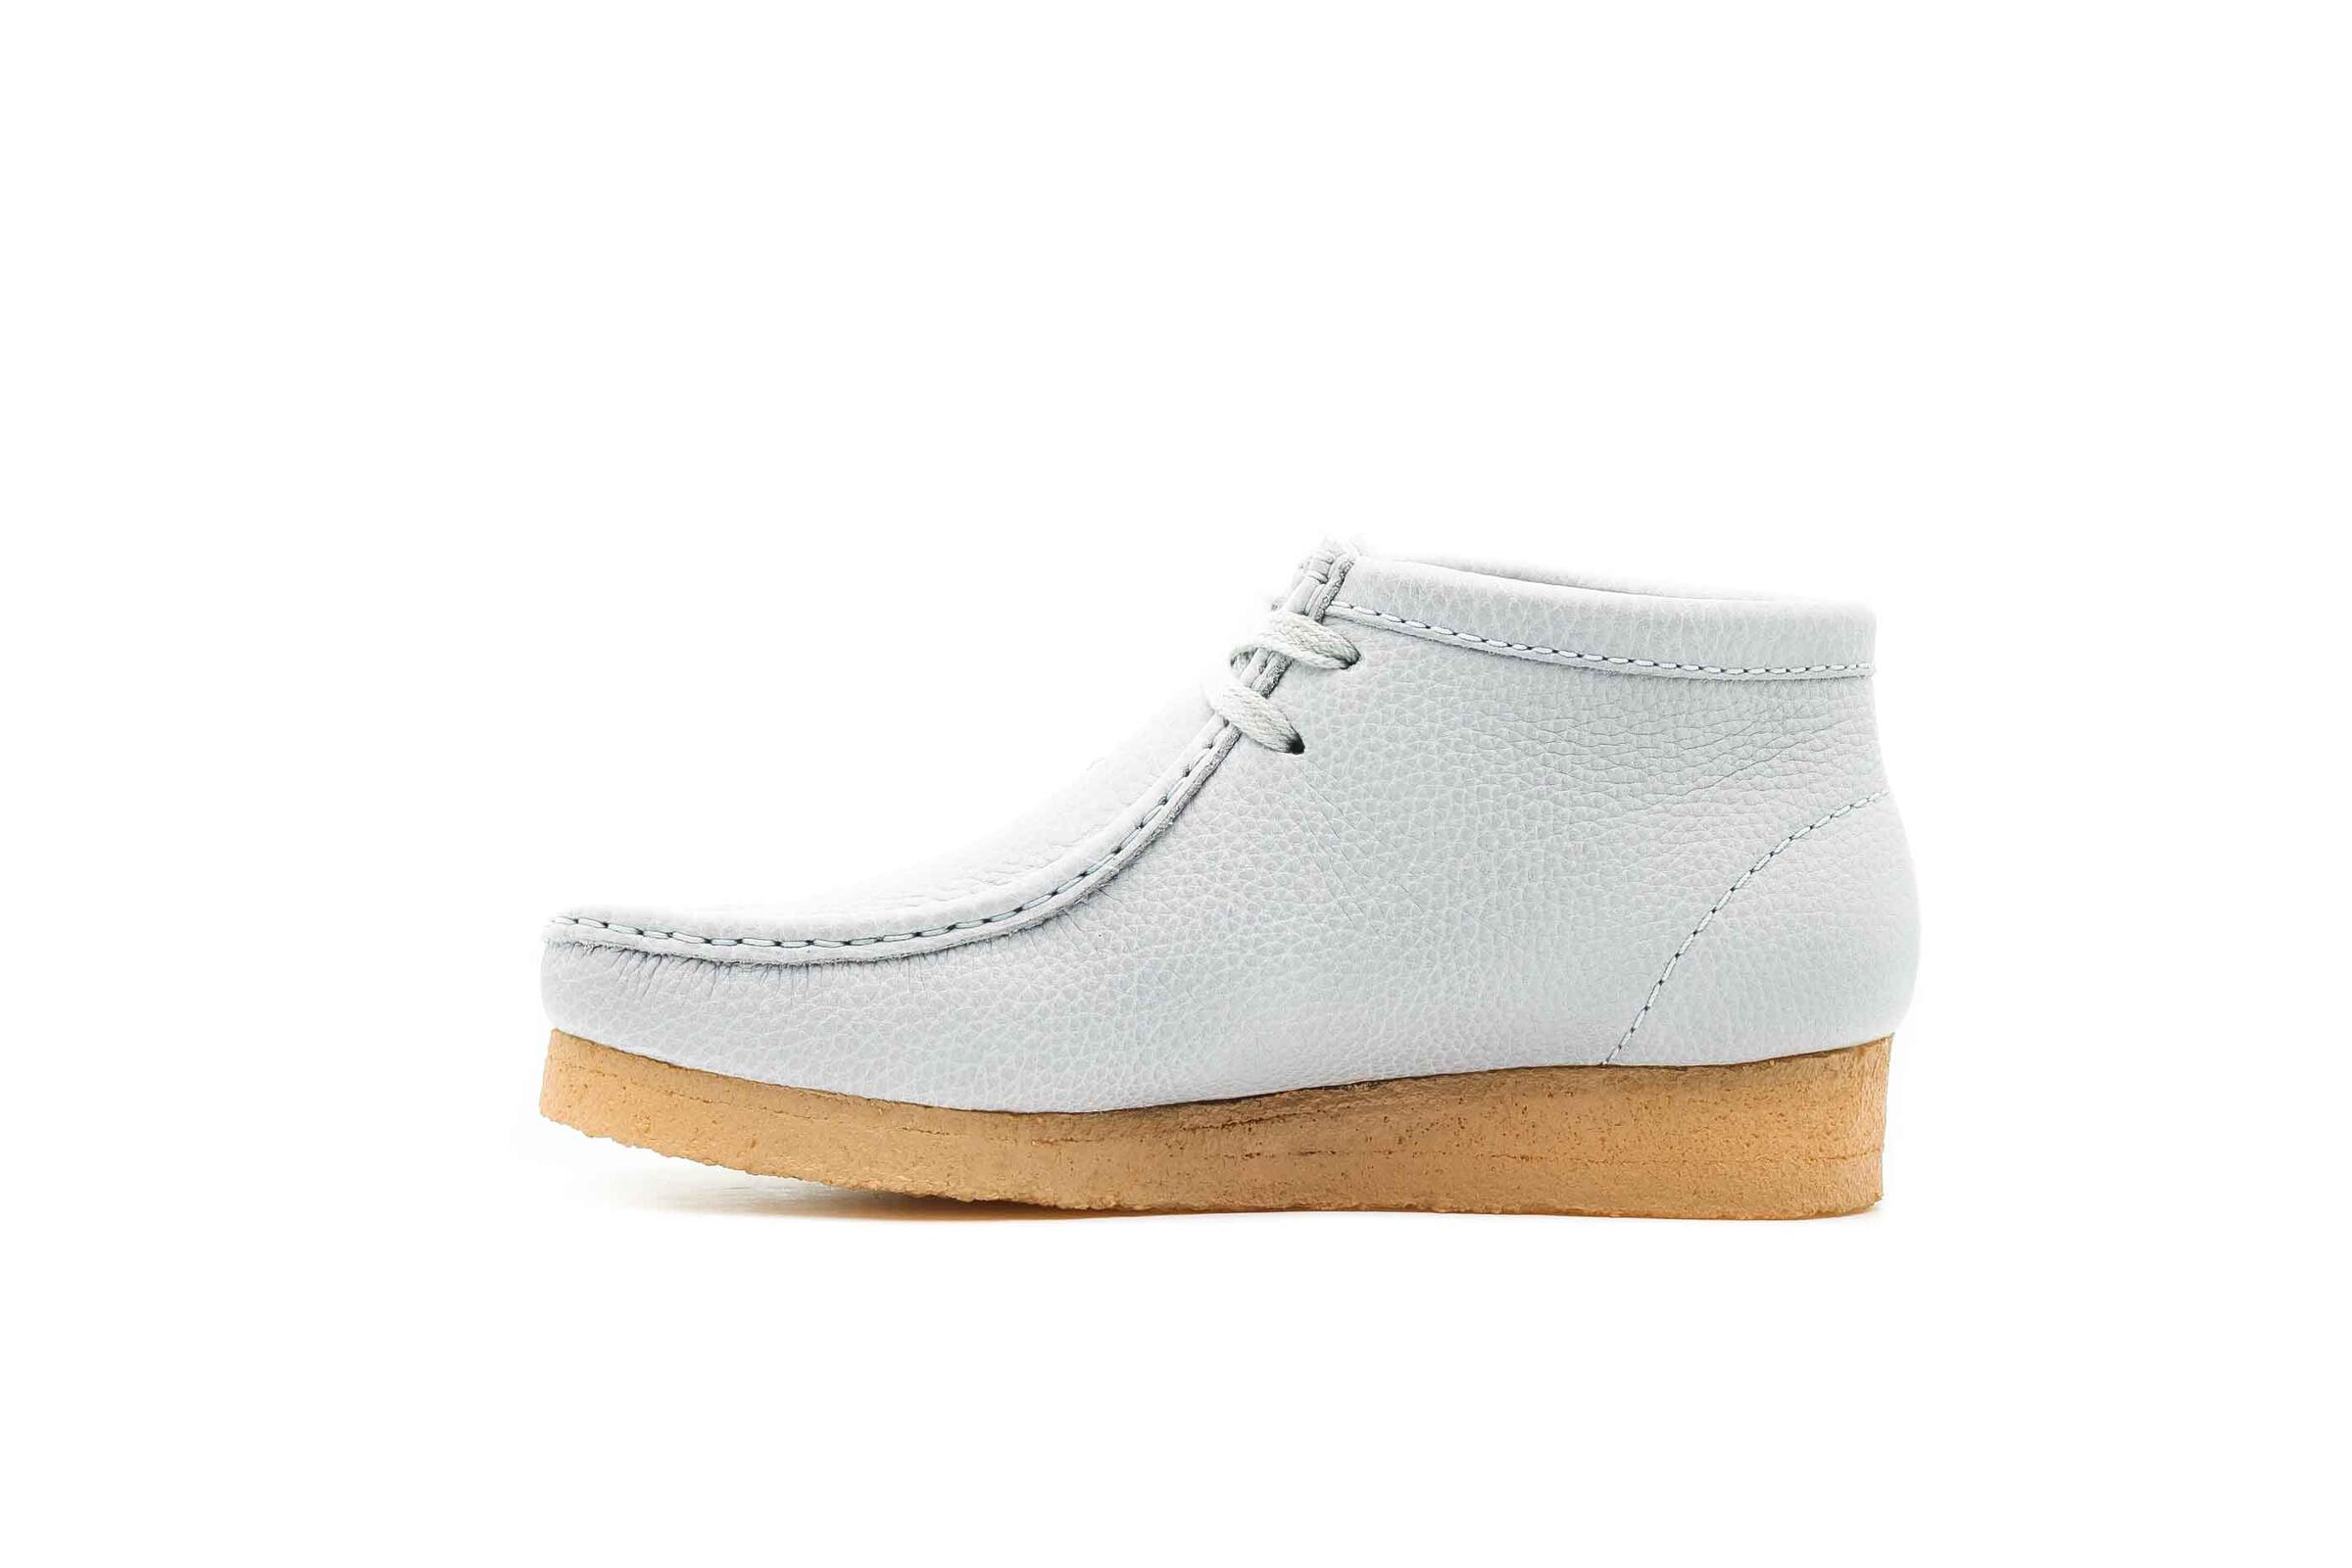 Clarks Originals x SPORTY AND RICH WALLABEE BOOT "LIGHT BLUE"